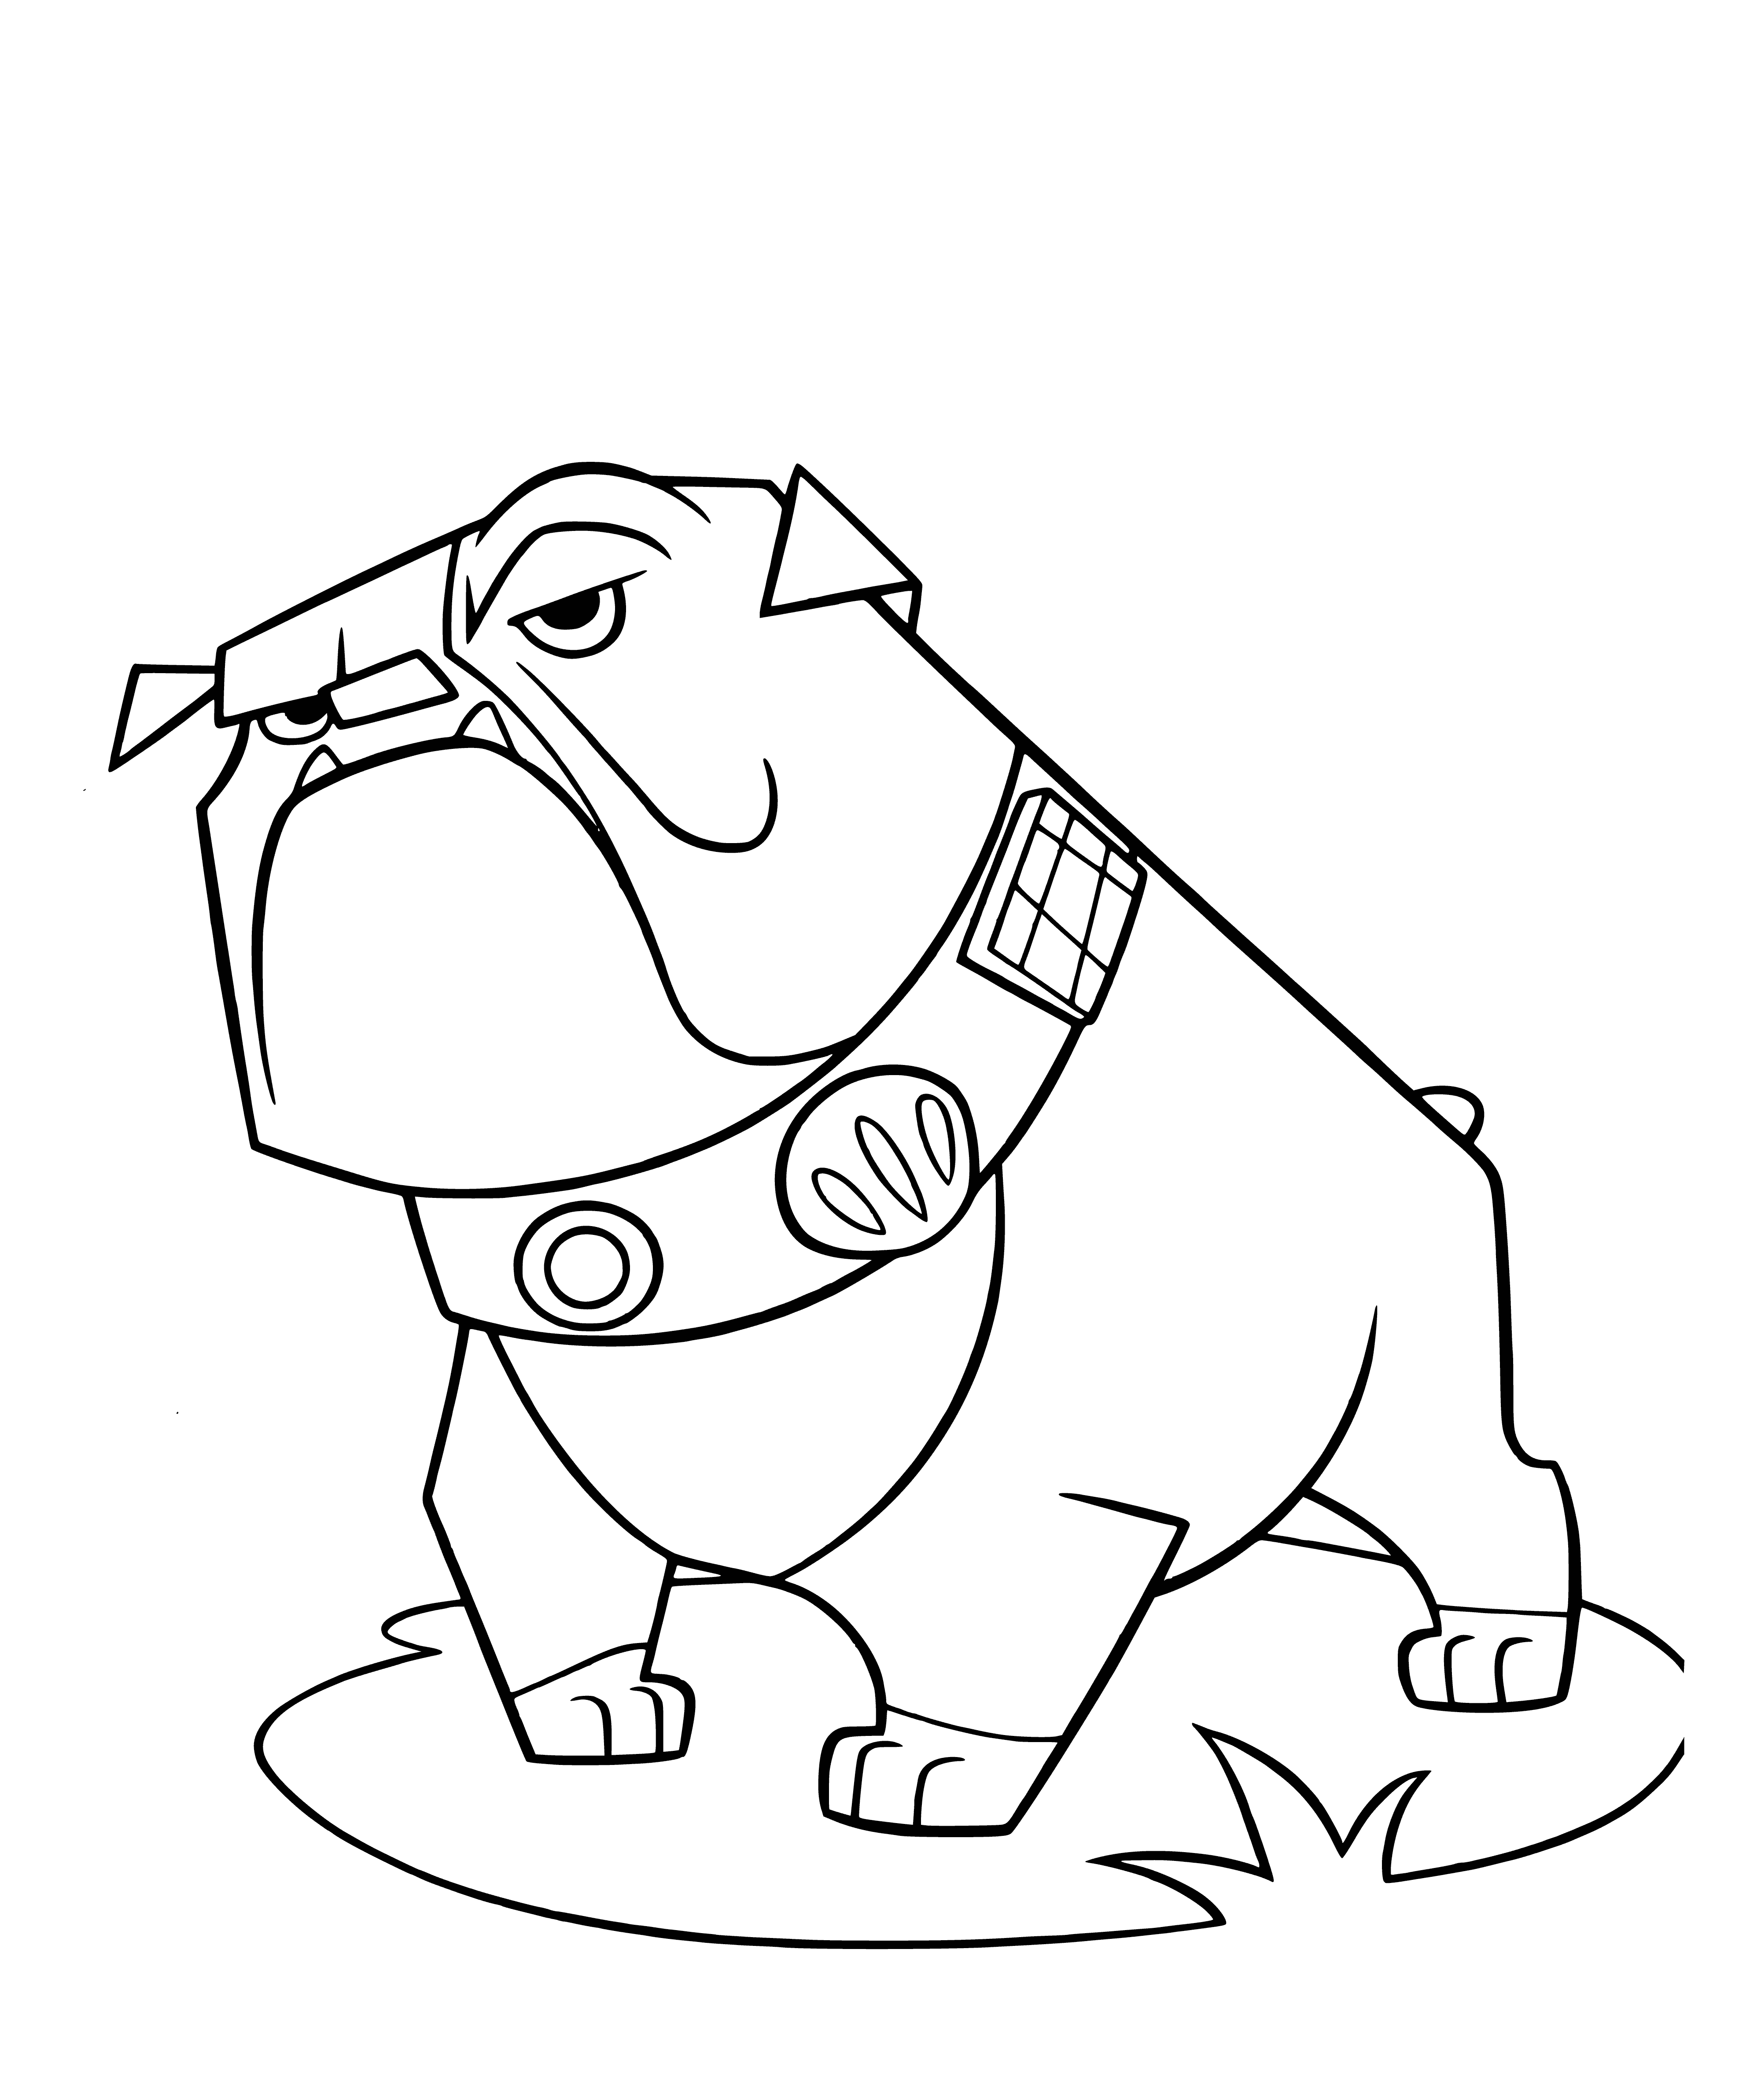 coloring page: Cute bulldog wearing a blue shirt w/ a white 'U' stands on two legs, big head & small body, big black eyes, open mouth & tongue hanging out. #Cartoon #ColoringPage